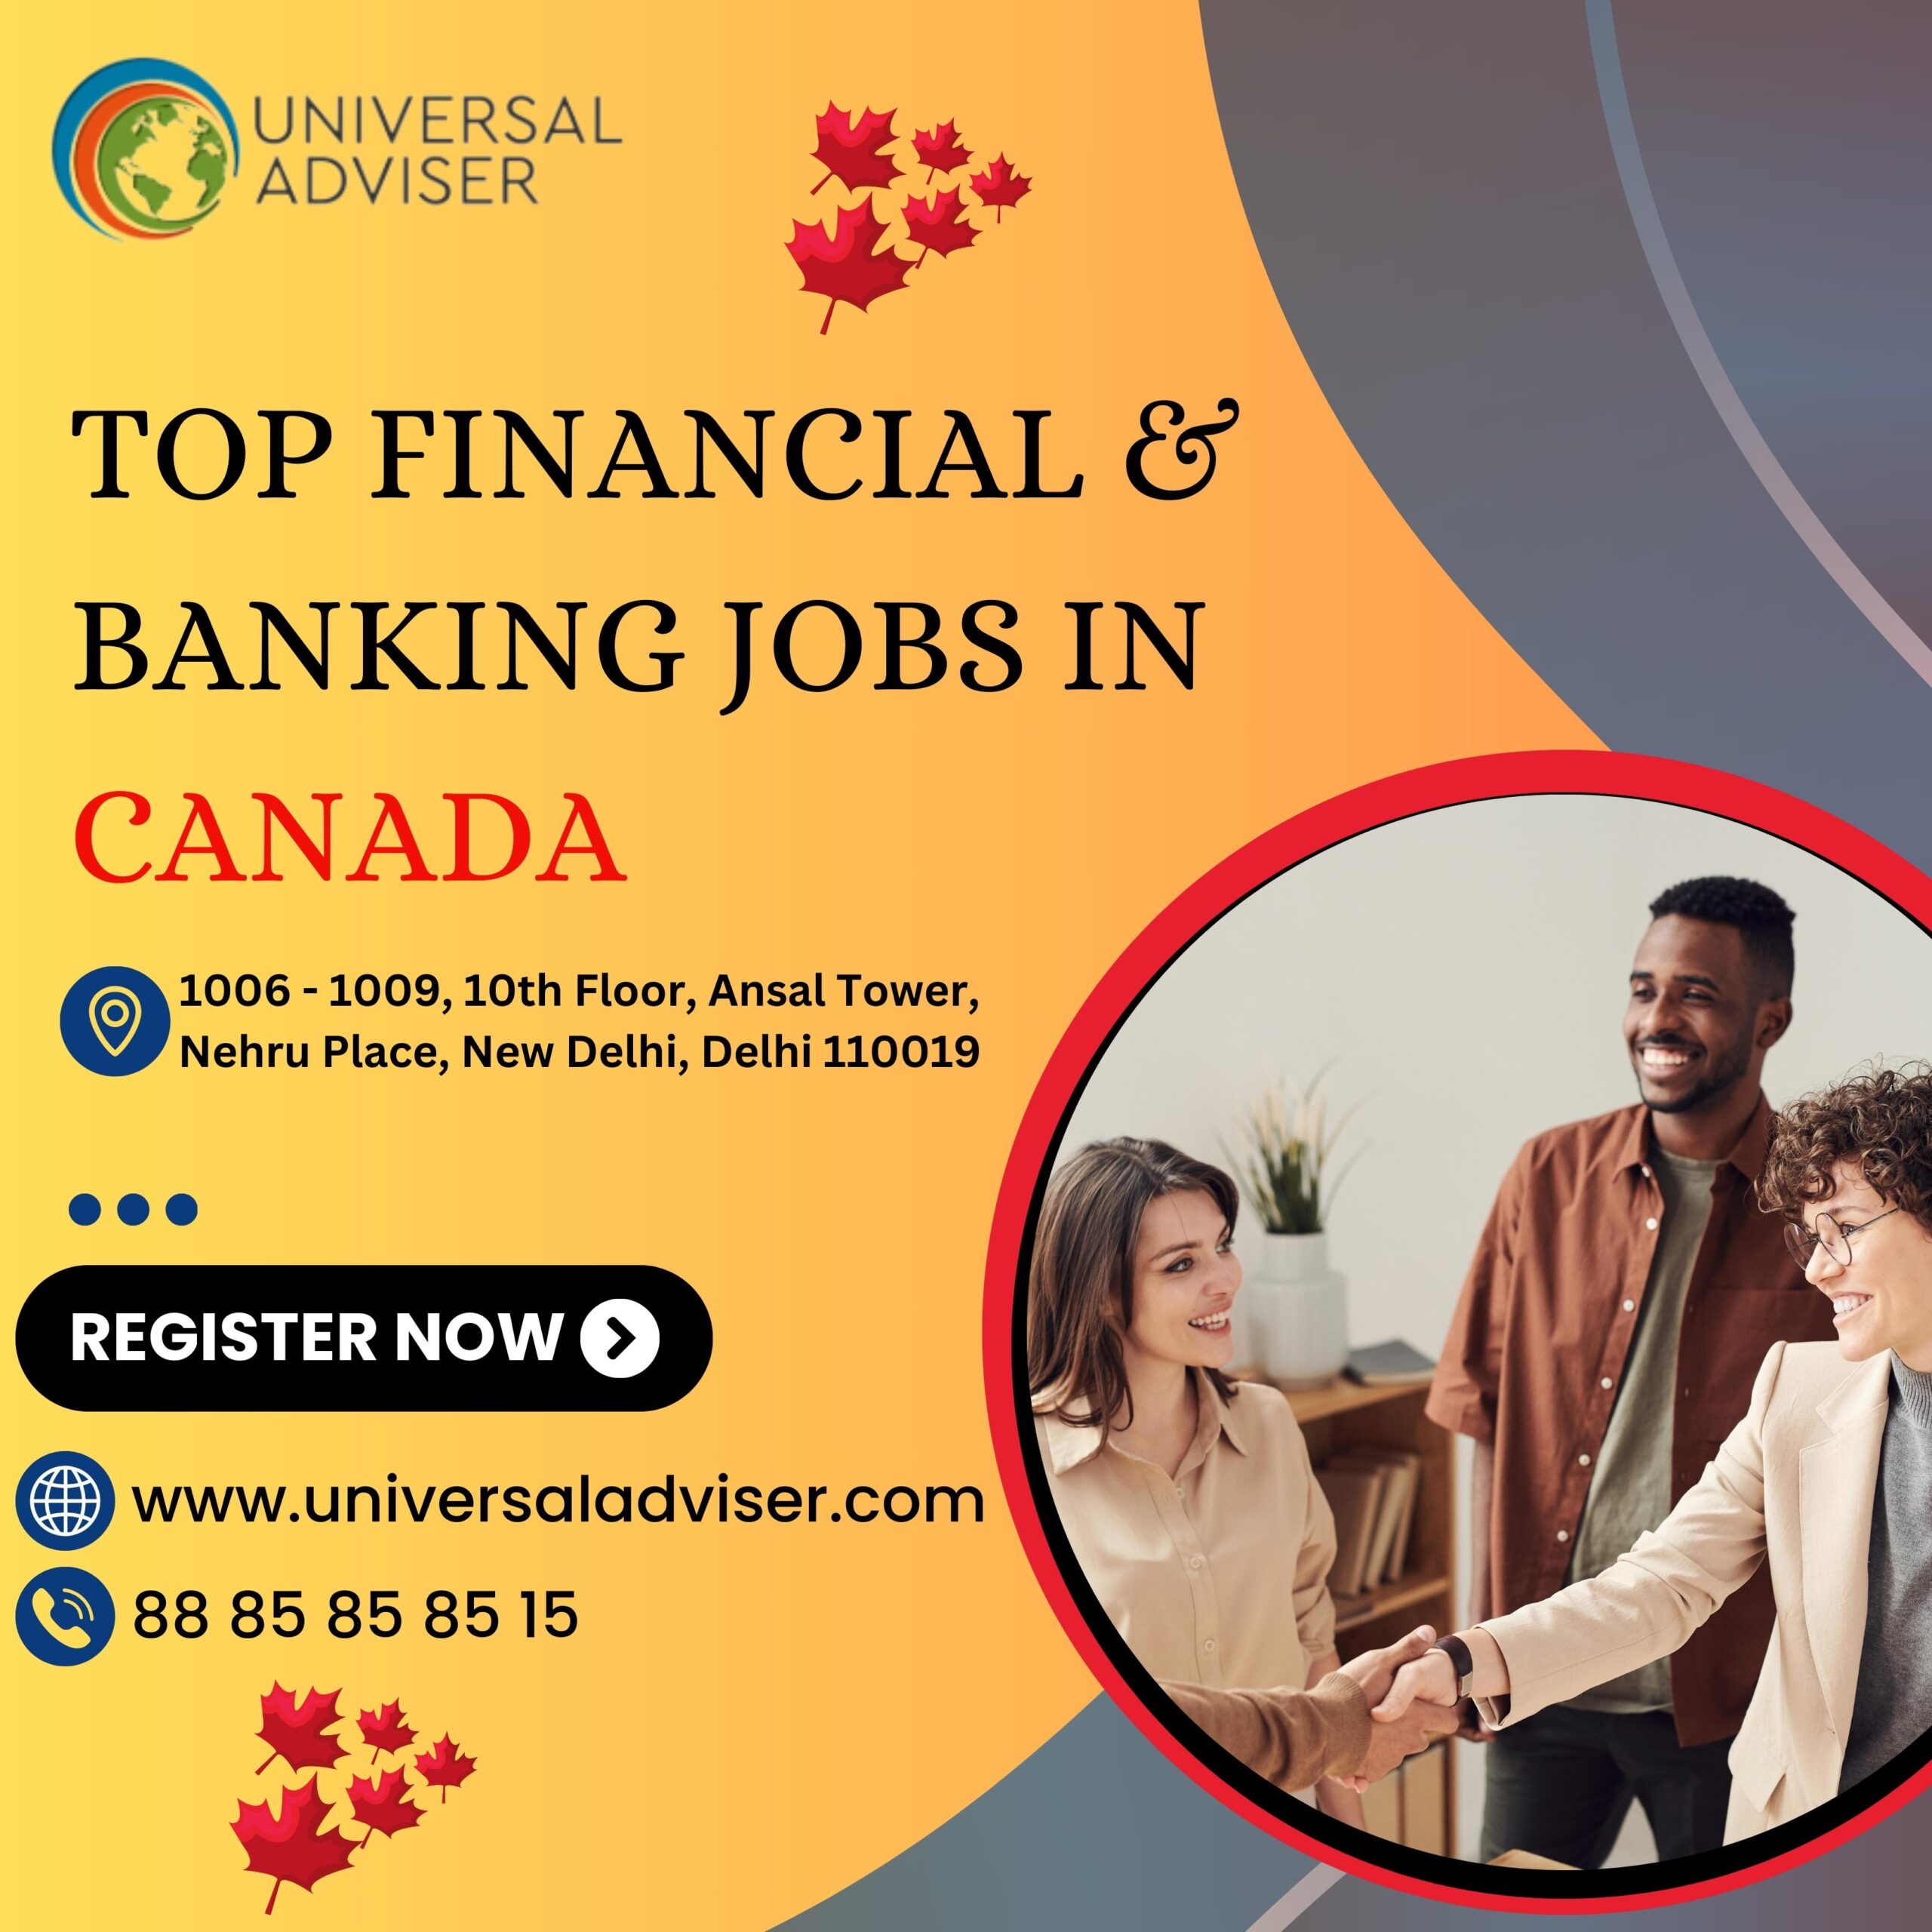 Top Financial & Banking Jobs in Canada